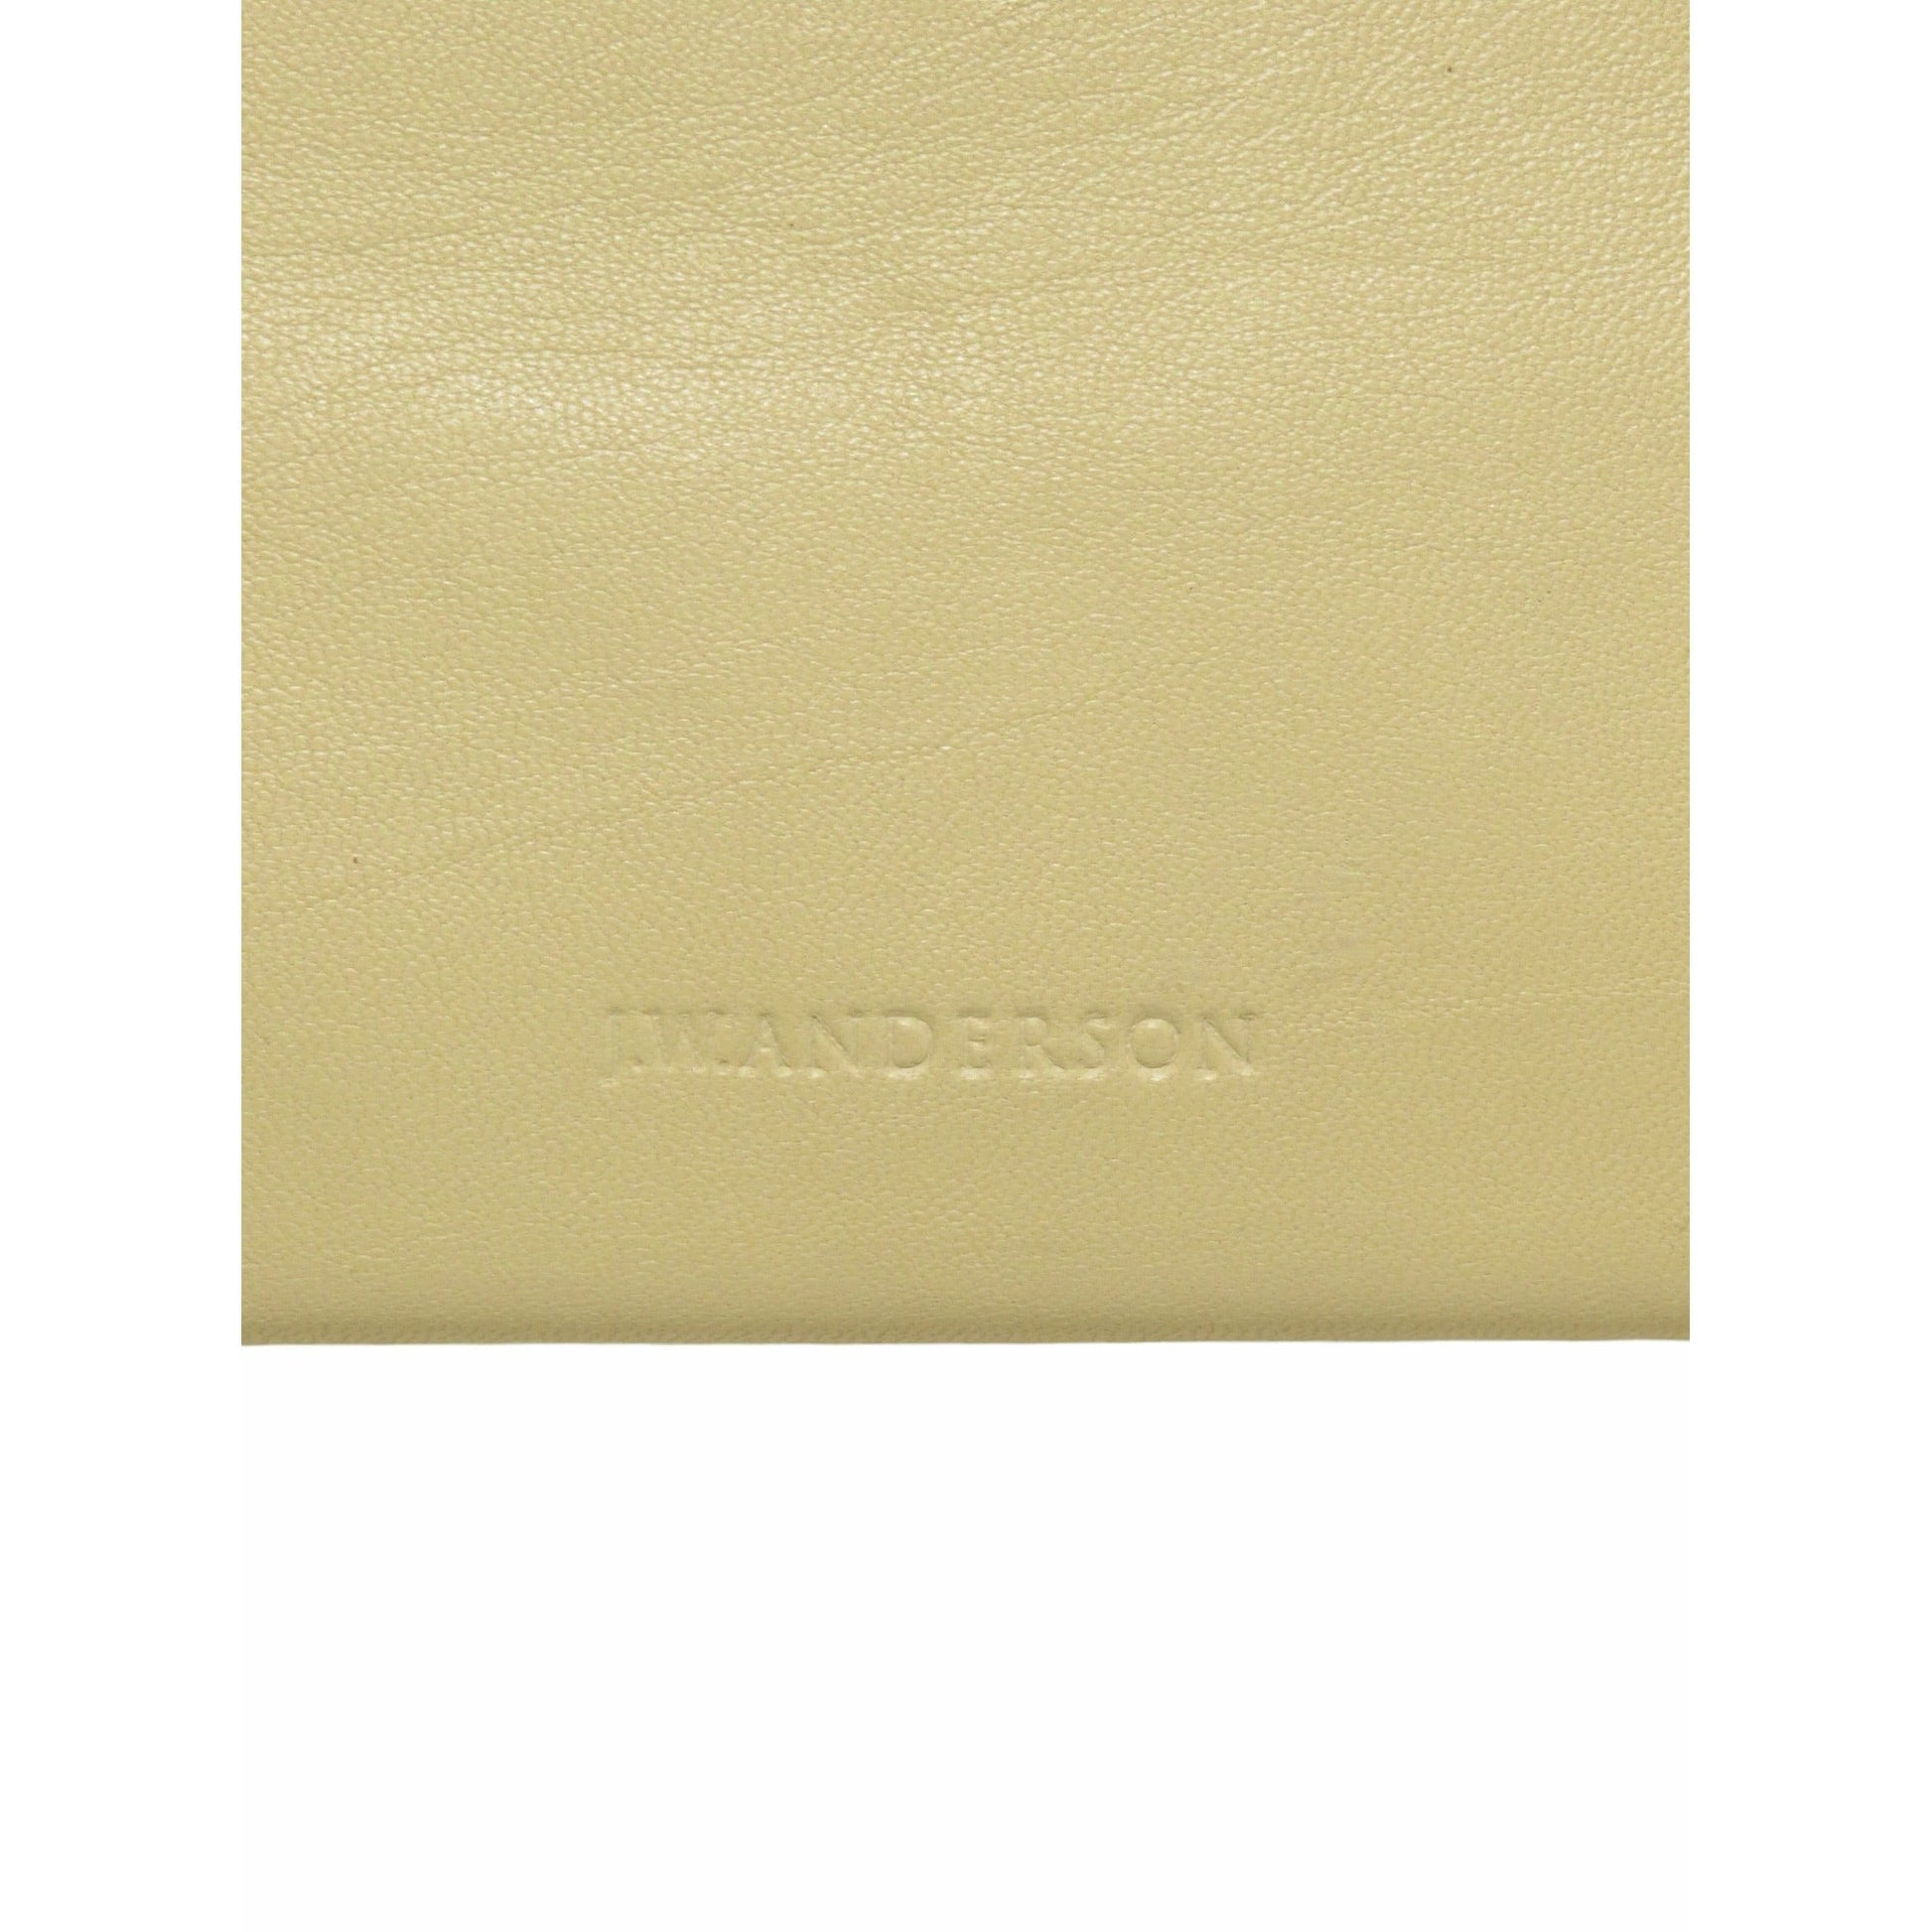 JW Anderson Handbags OS / Yellow and Grey / Lambskin JW Anderson Twister Tote